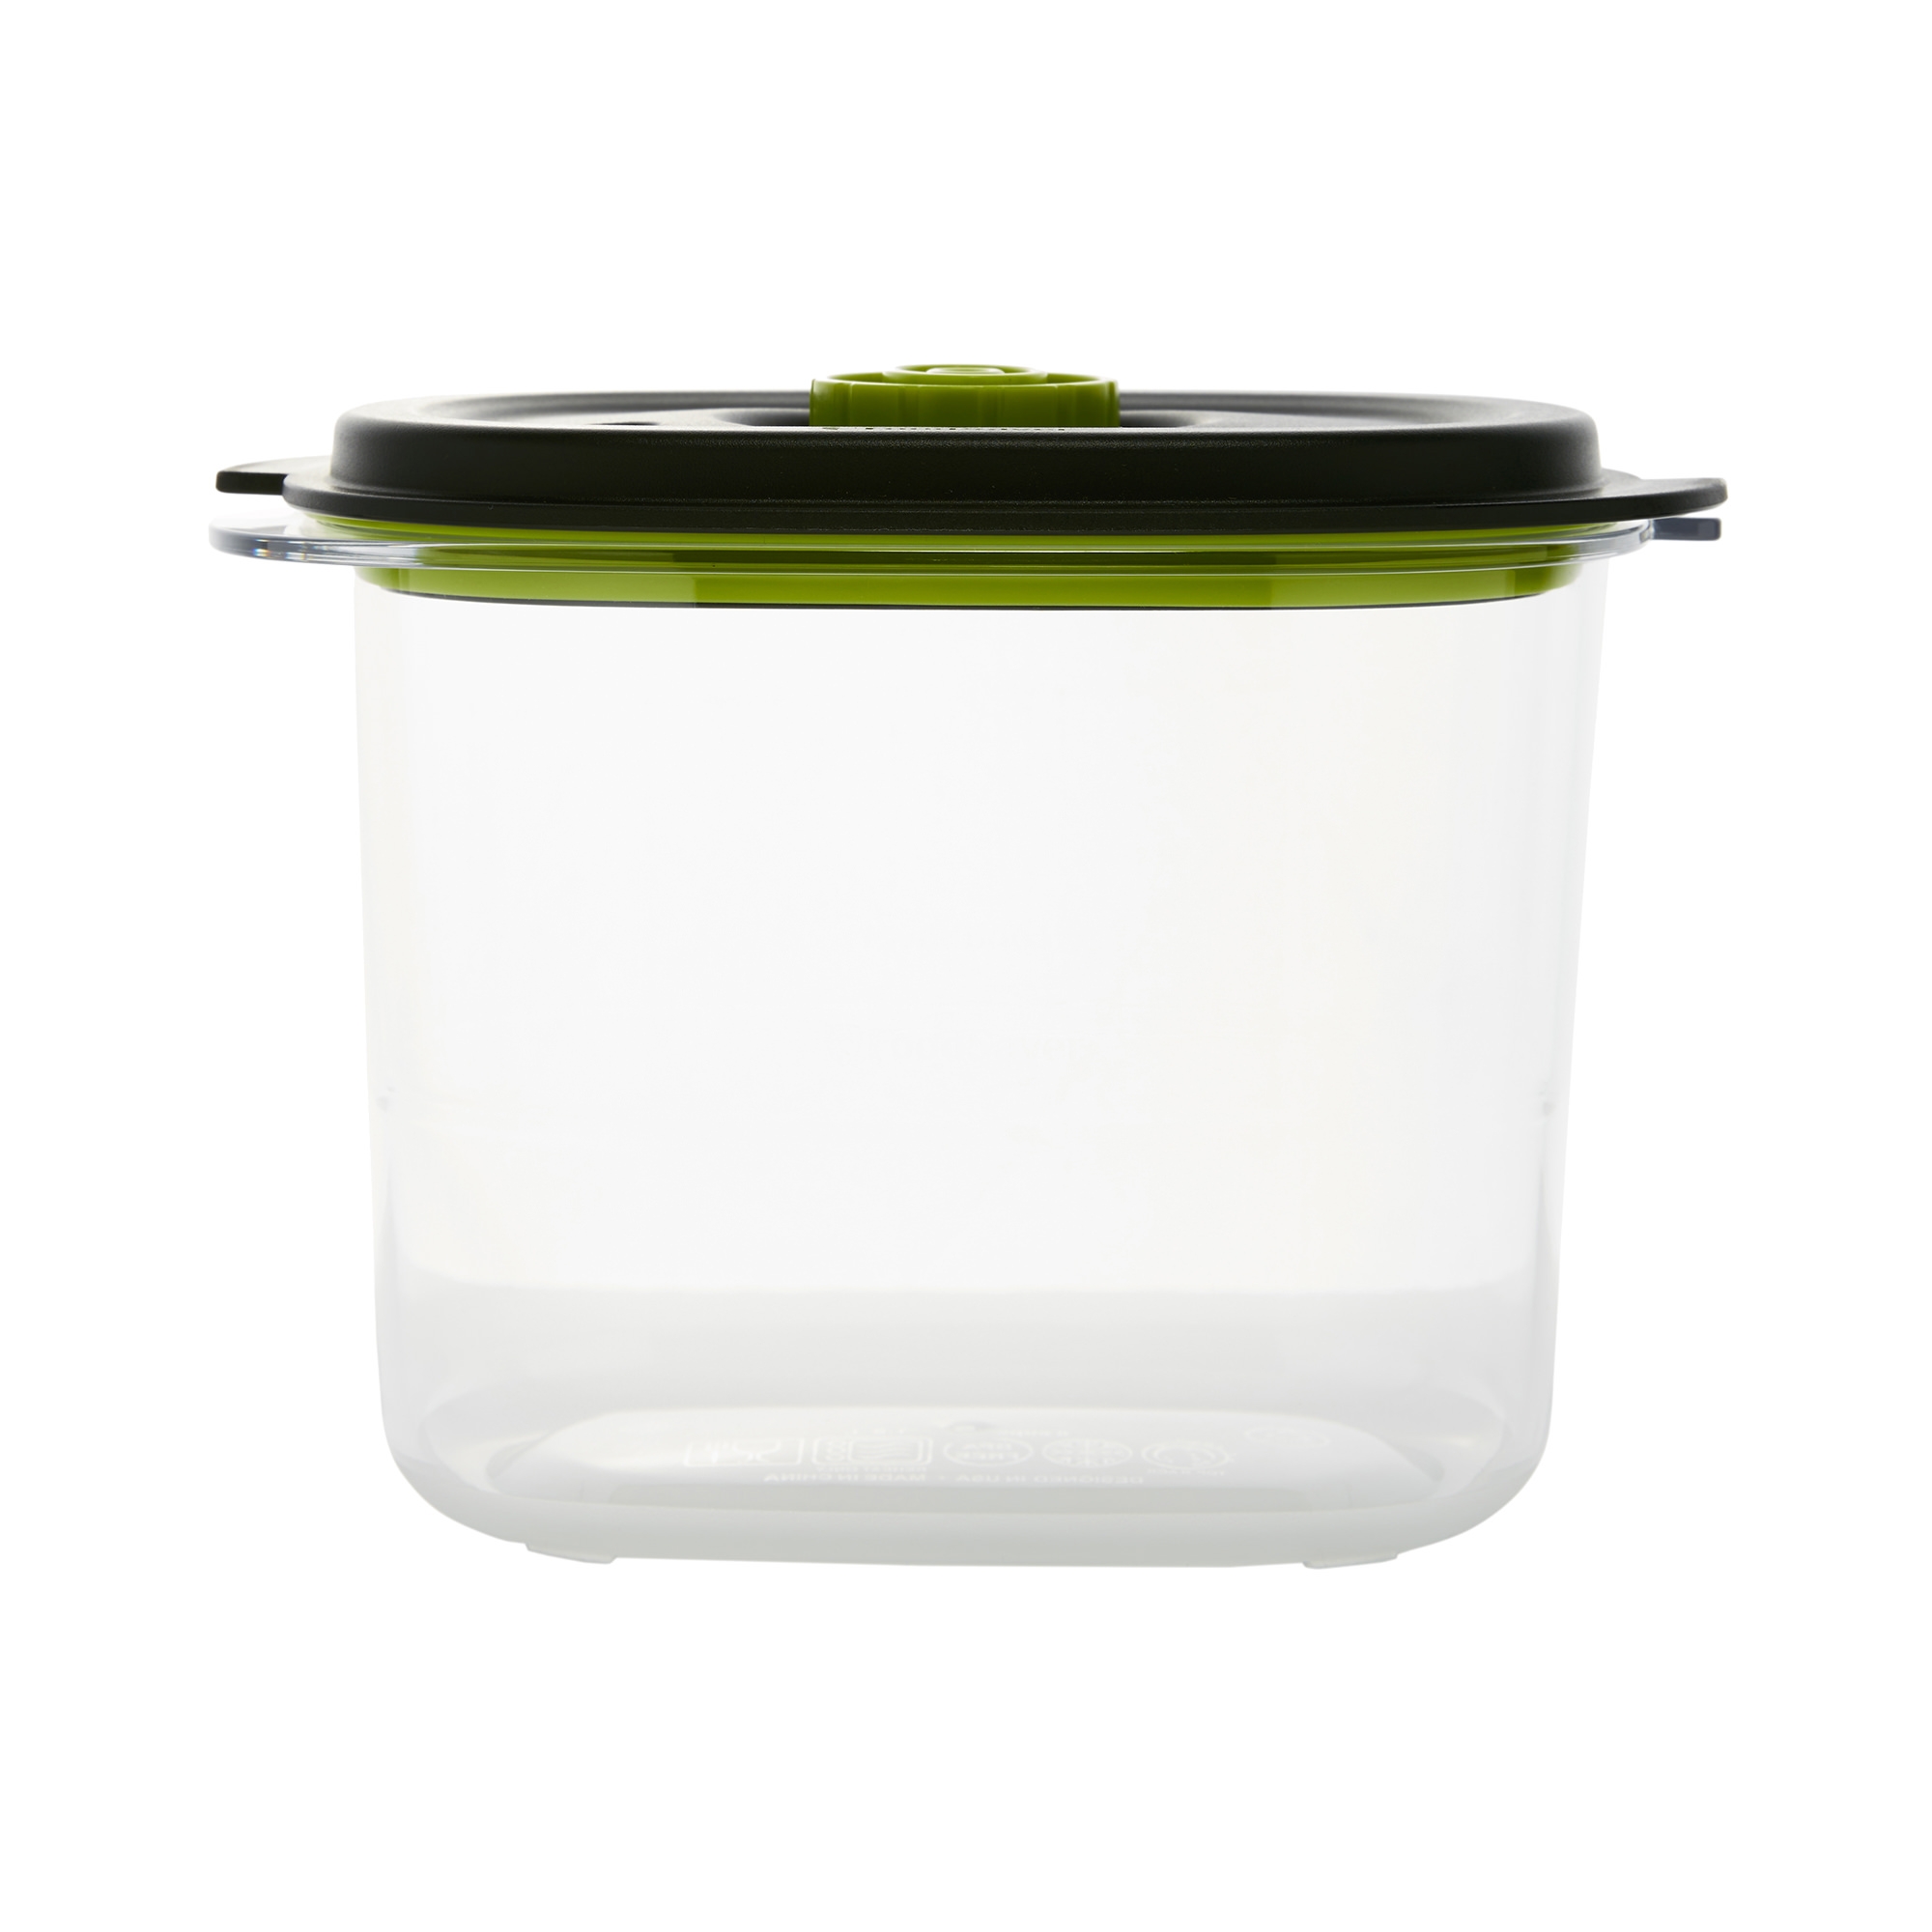 FoodSaver Preserve & Marinate Container 8 Cup Black Image 1